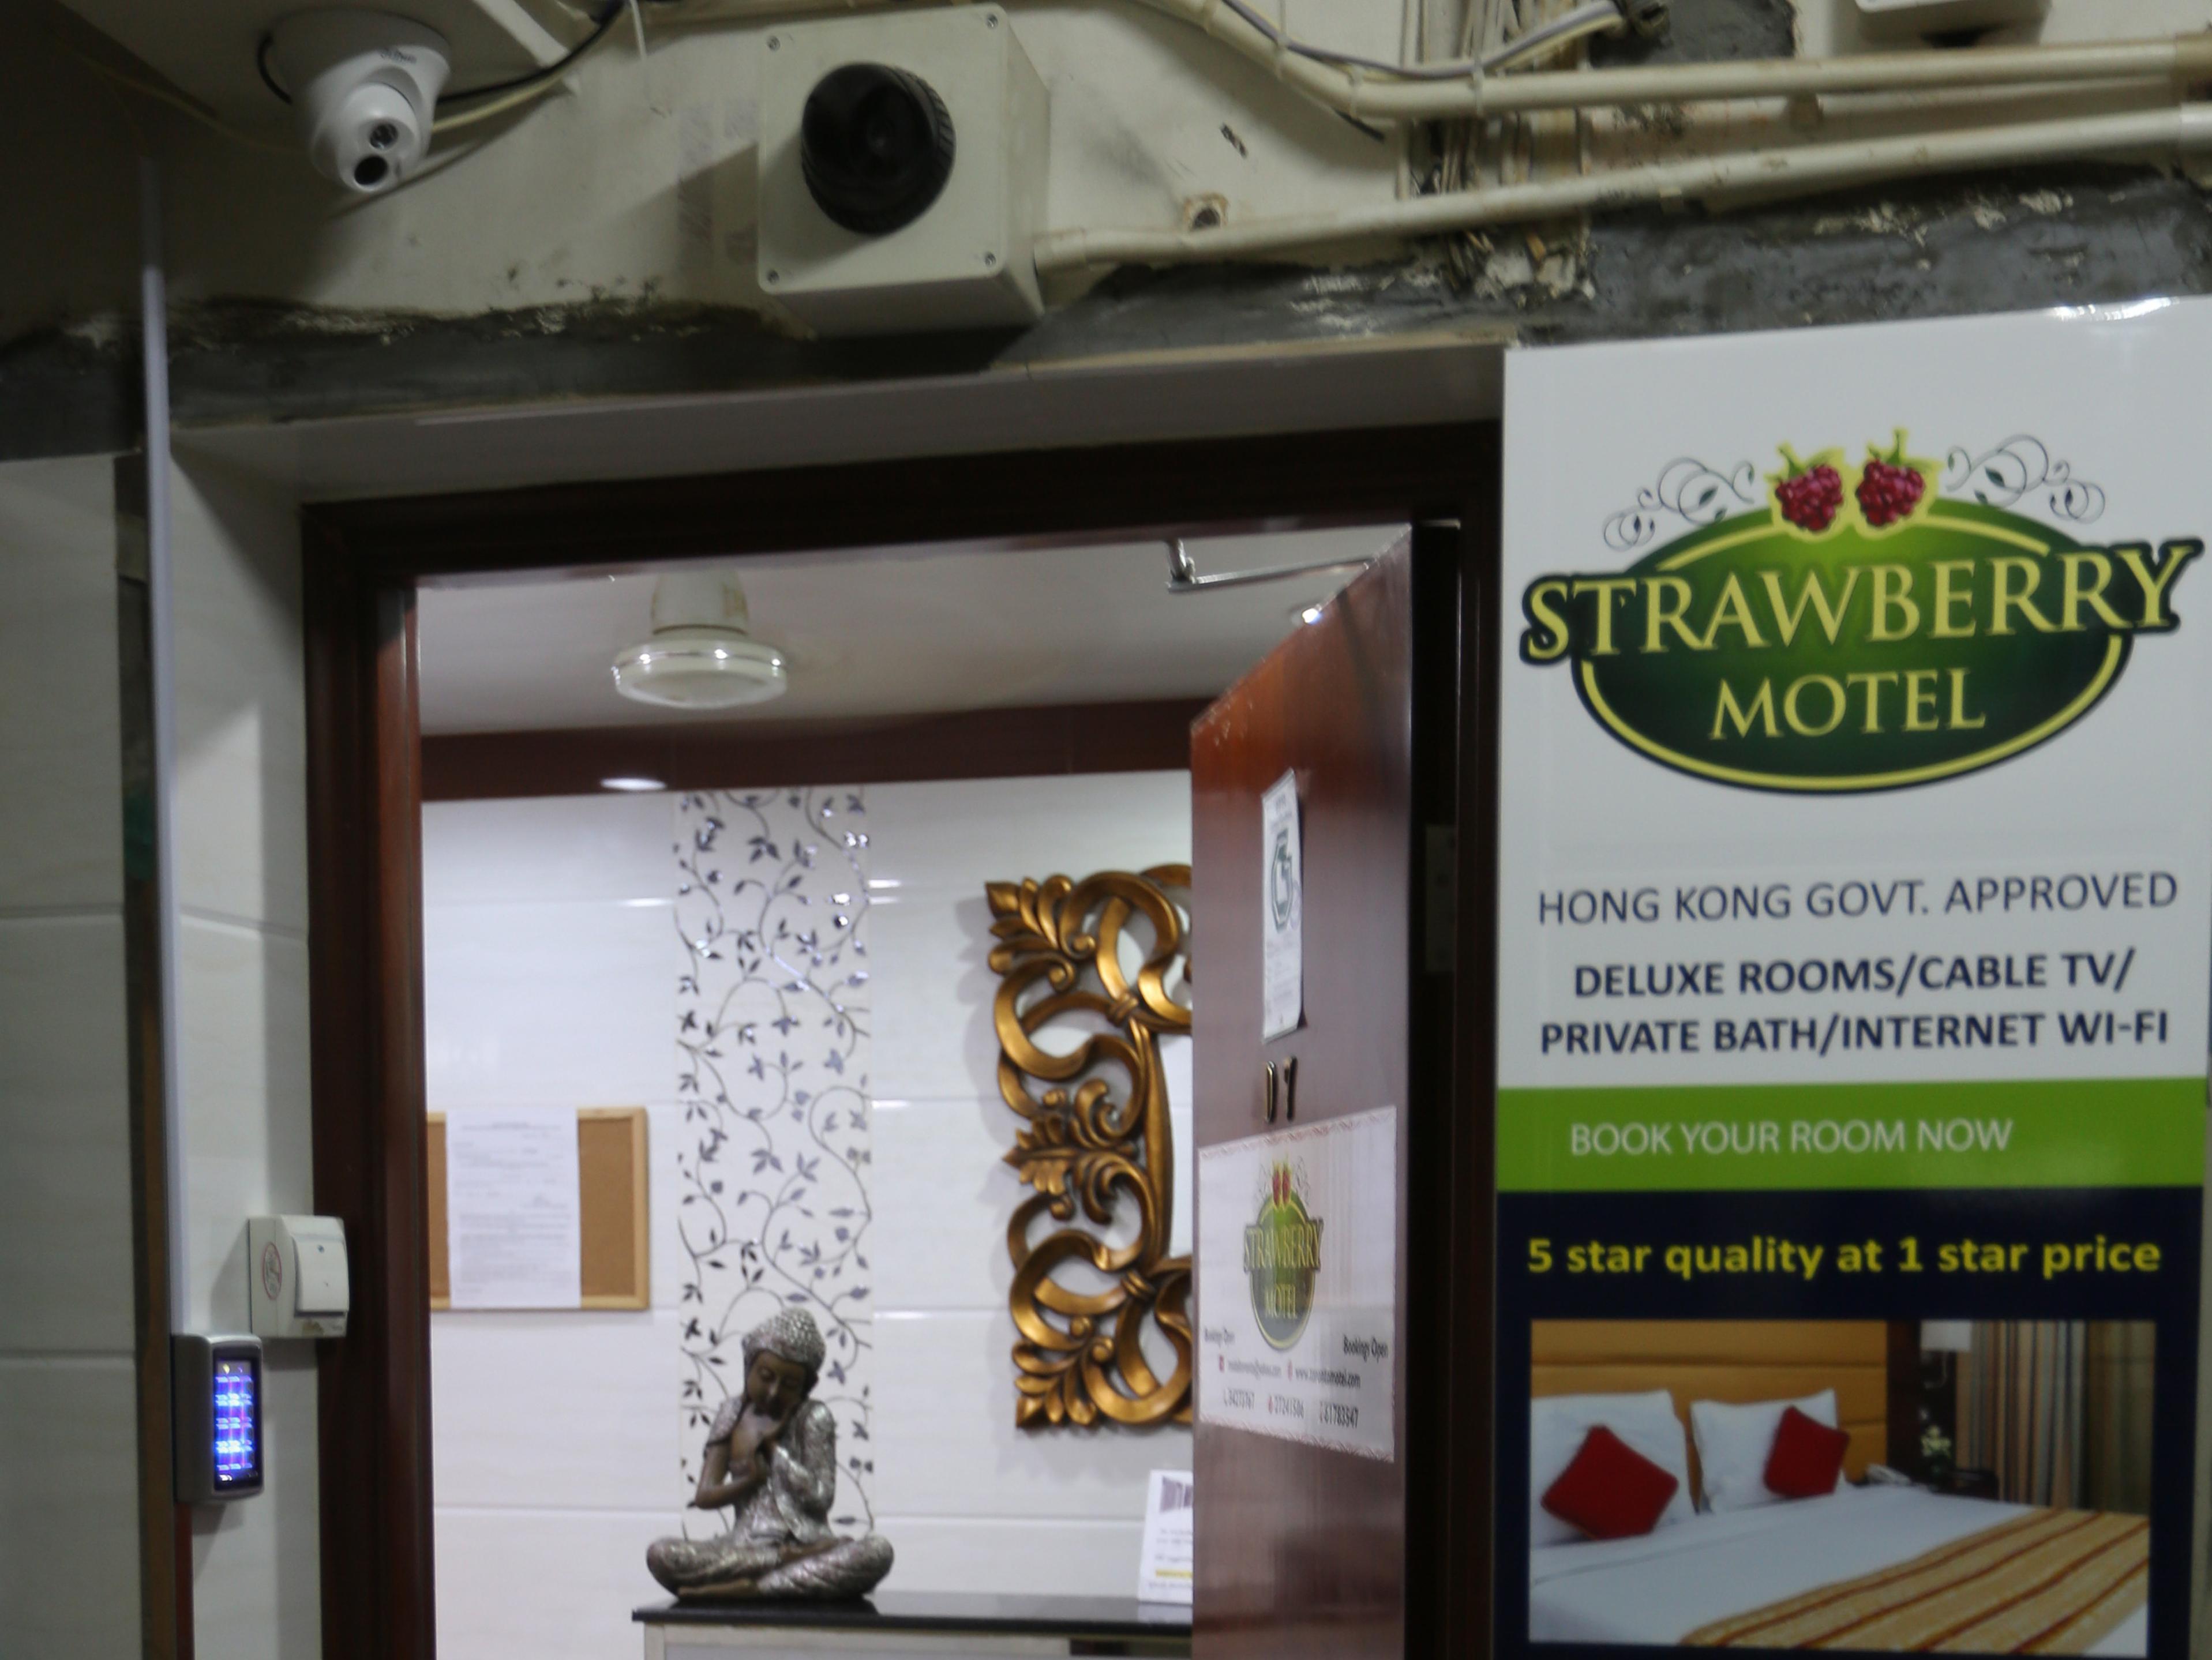 Strawberry Guest House - Toronto Motel Group Hong Kong FAQ 2016, What facilities are there in Strawberry Guest House - Toronto Motel Group Hong Kong 2016, What Languages Spoken are Supported in Strawberry Guest House - Toronto Motel Group Hong Kong 2016, Which payment cards are accepted in Strawberry Guest House - Toronto Motel Group Hong Kong , Hong Kong Strawberry Guest House - Toronto Motel Group room facilities and services Q&A 2016, Hong Kong Strawberry Guest House - Toronto Motel Group online booking services 2016, Hong Kong Strawberry Guest House - Toronto Motel Group address 2016, Hong Kong Strawberry Guest House - Toronto Motel Group telephone number 2016,Hong Kong Strawberry Guest House - Toronto Motel Group map 2016, Hong Kong Strawberry Guest House - Toronto Motel Group traffic guide 2016, how to go Hong Kong Strawberry Guest House - Toronto Motel Group, Hong Kong Strawberry Guest House - Toronto Motel Group booking online 2016, Hong Kong Strawberry Guest House - Toronto Motel Group room types 2016.